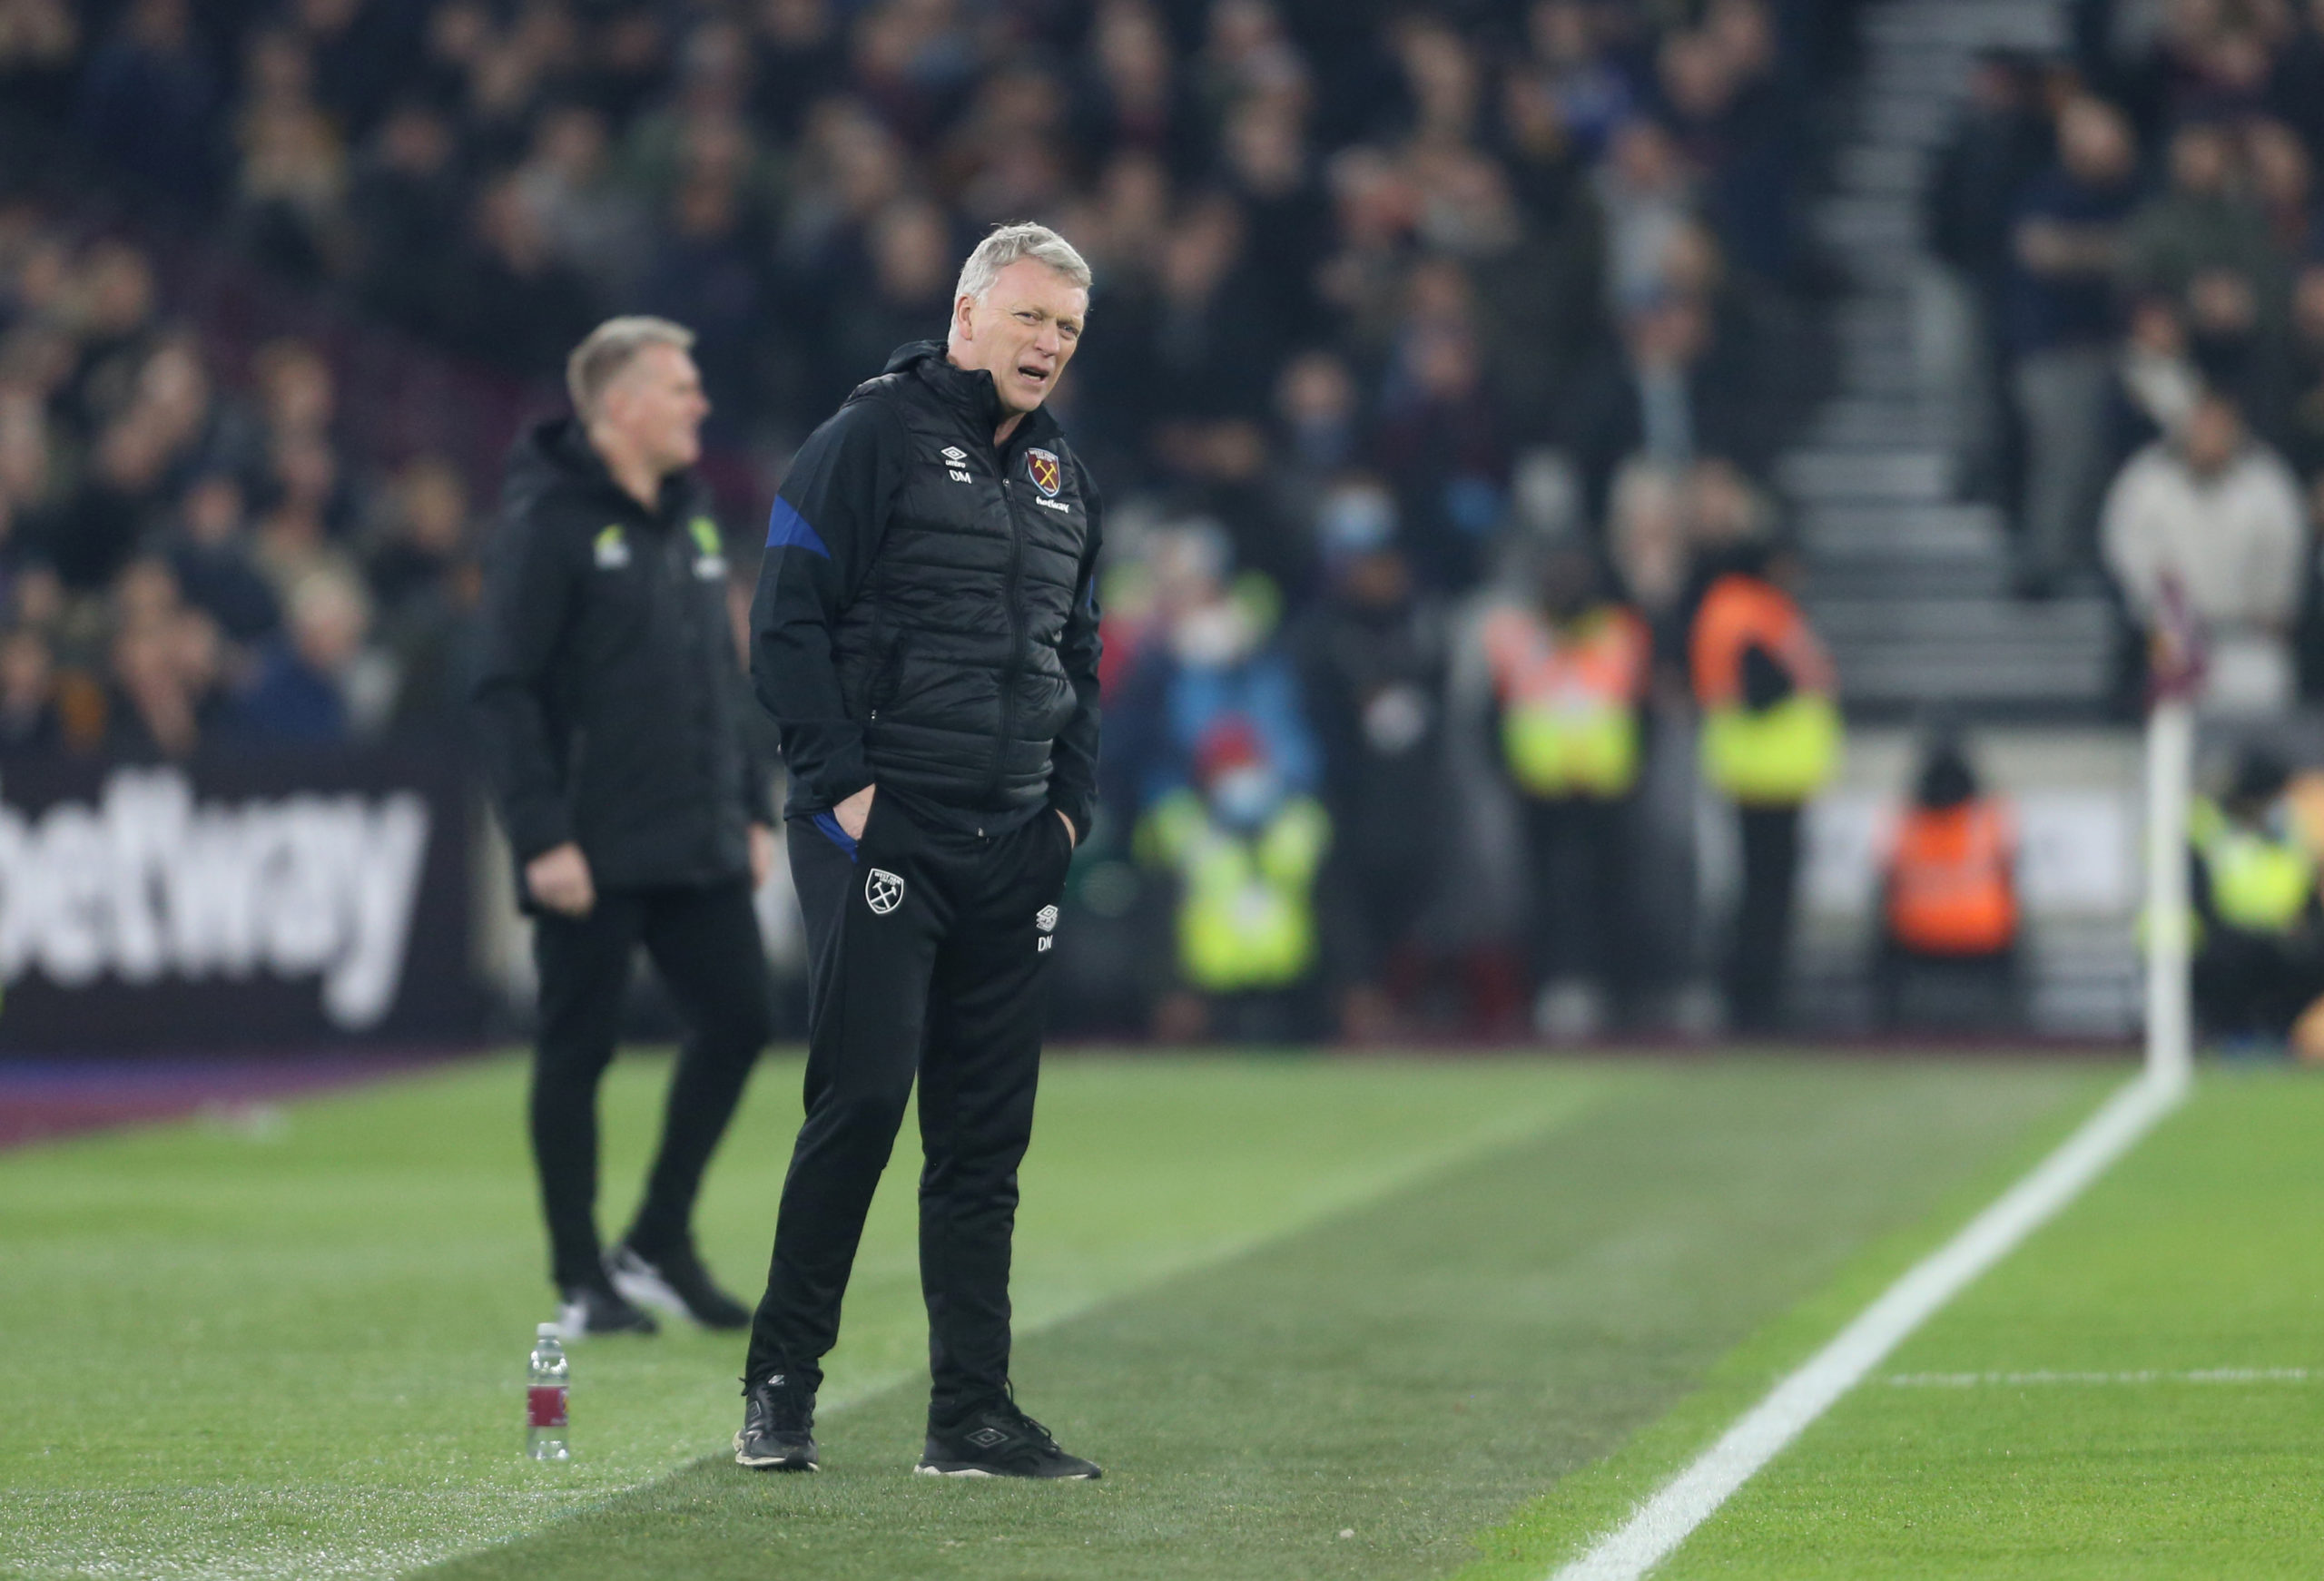 West Ham send scouts on mission as David Moyes prepares for final Brereton Diaz January window decision